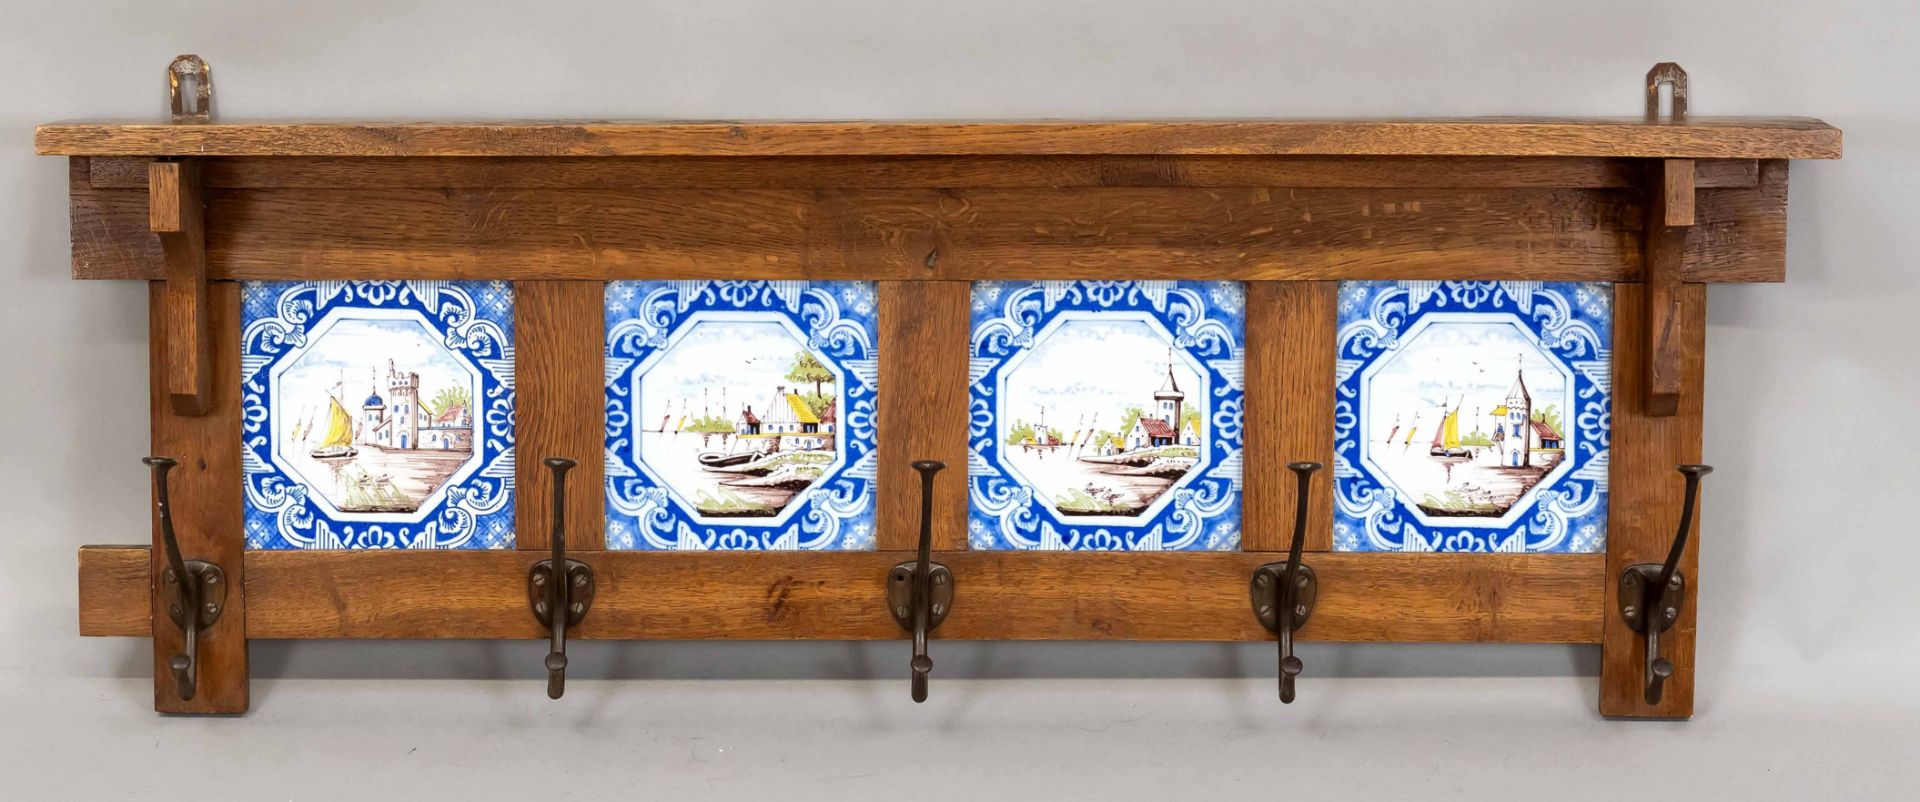 Wall coat rack, end of 19th c., 4 tiles with landscapes in oak frame, 5 double hooks, 33 x 92 cm